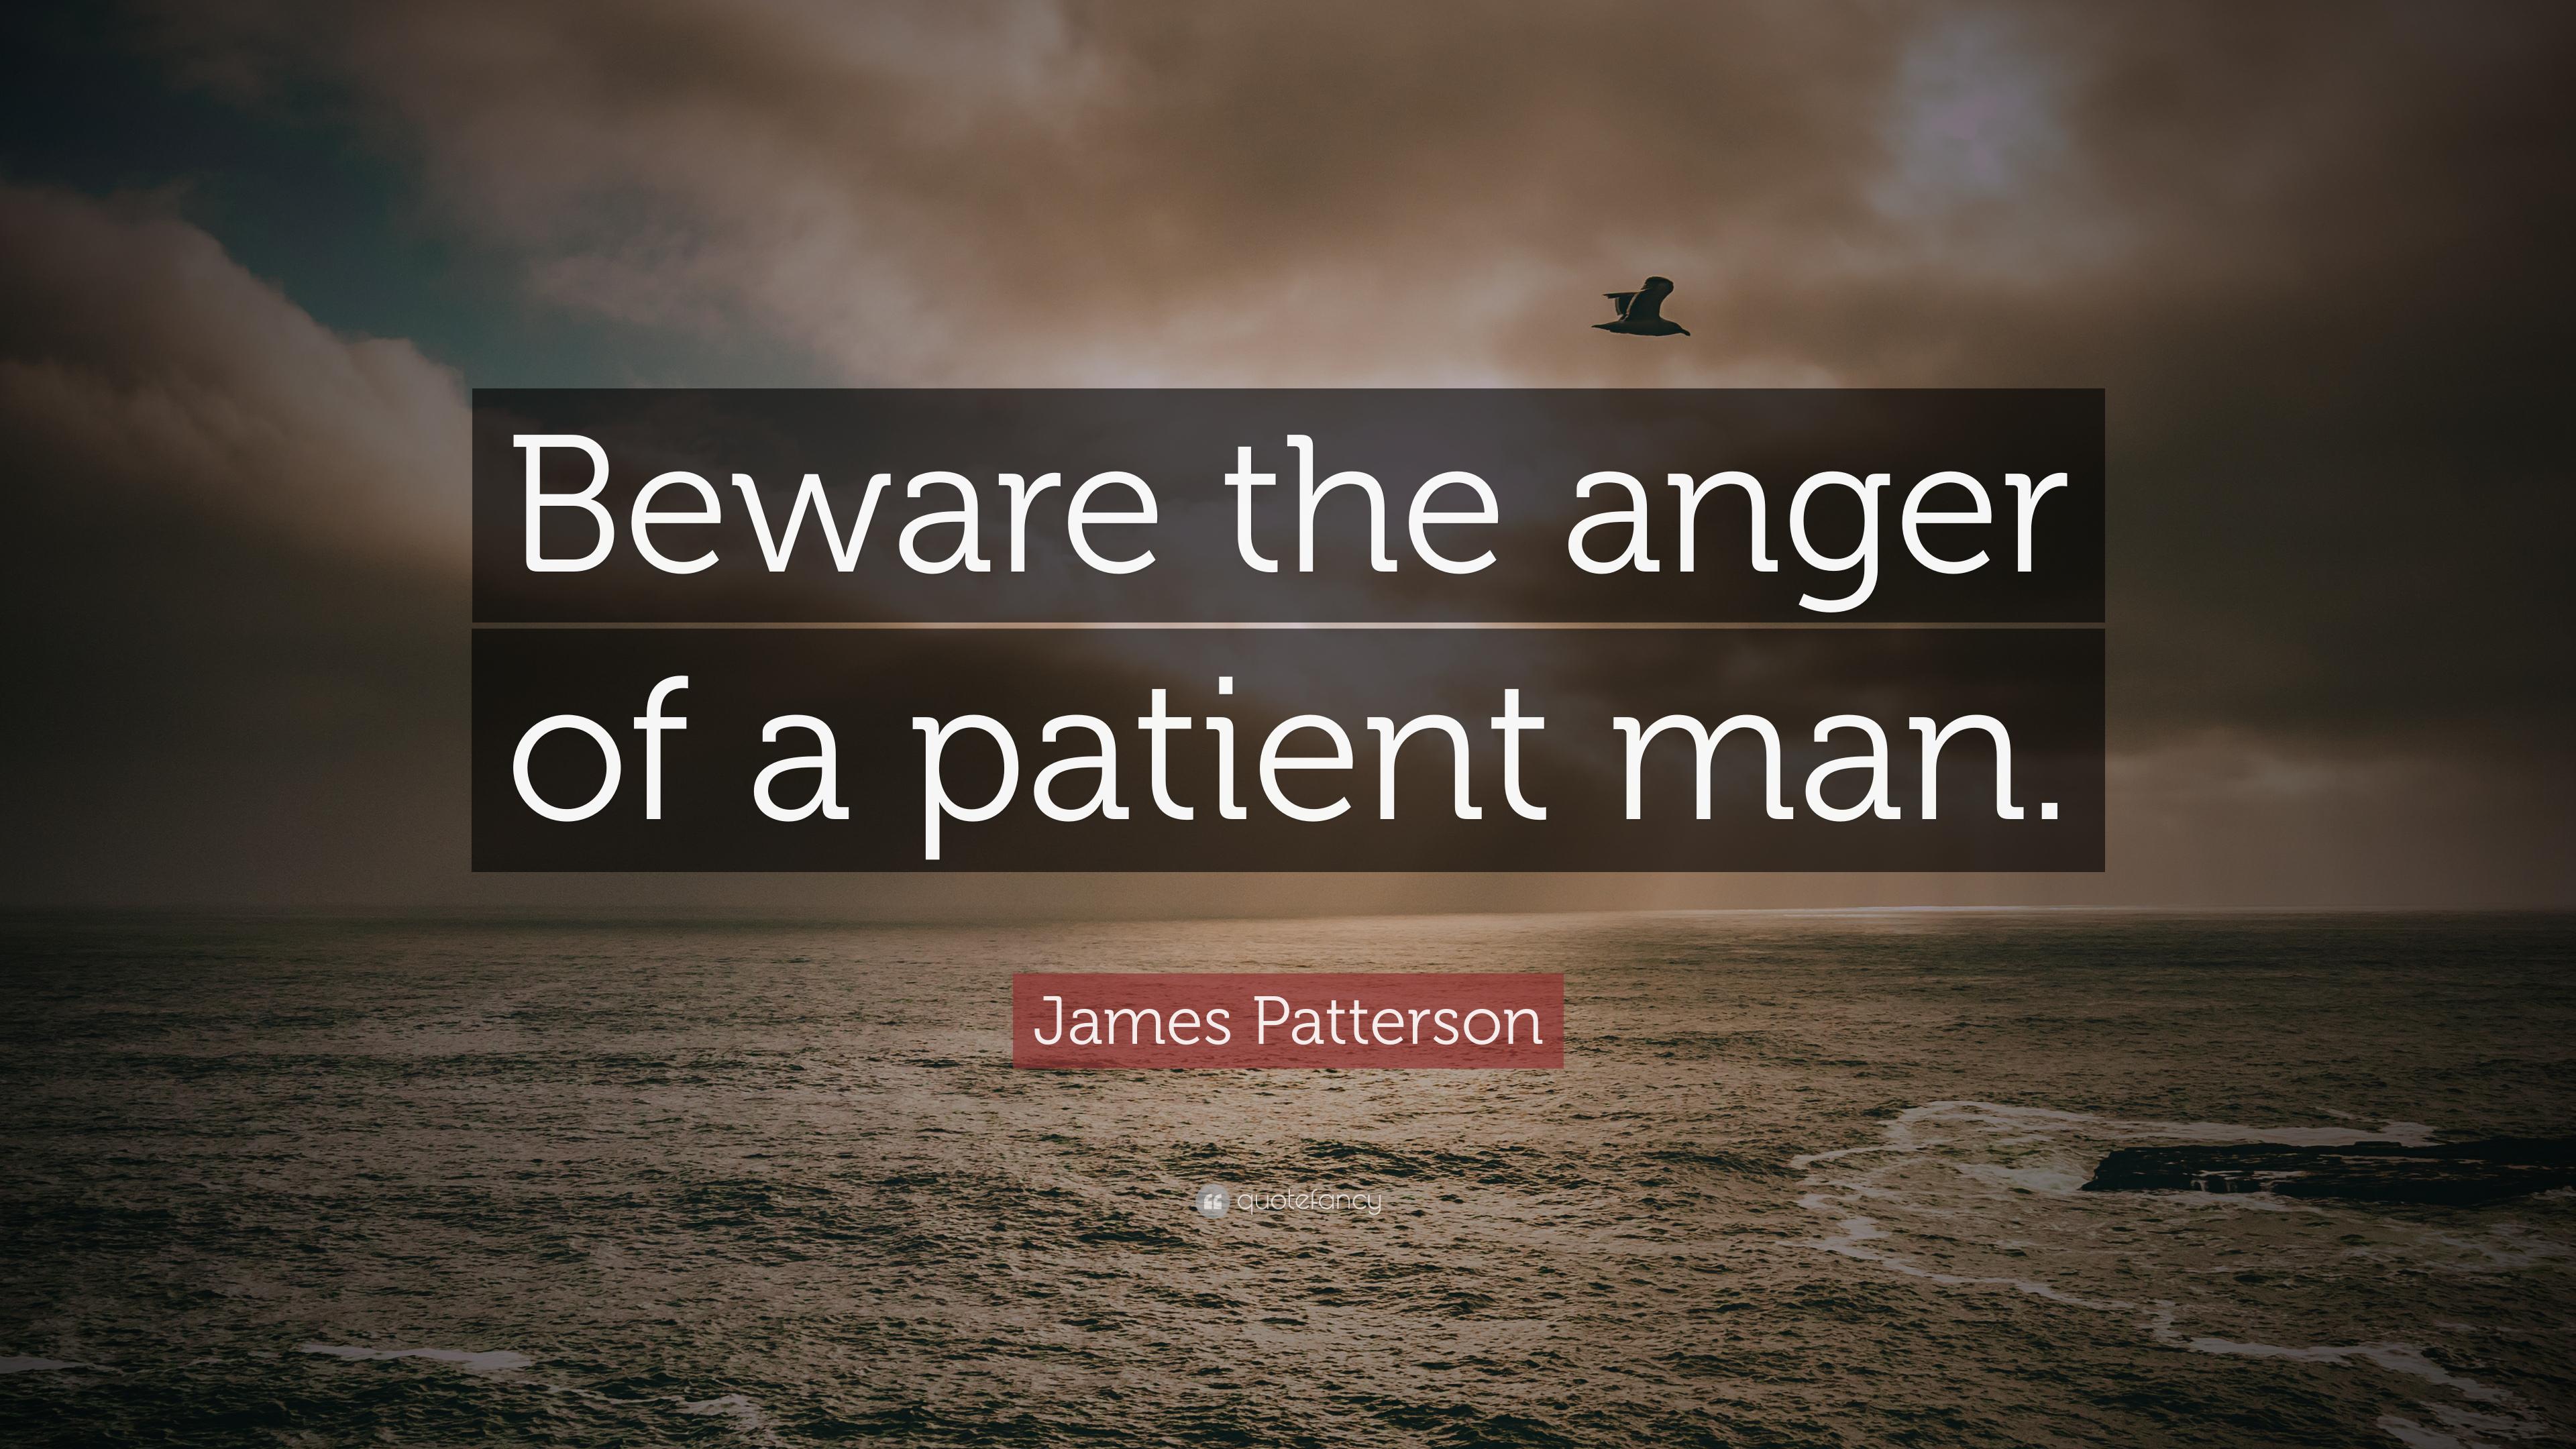 James Patterson Quote: “Beware the anger of a patient man.” 7